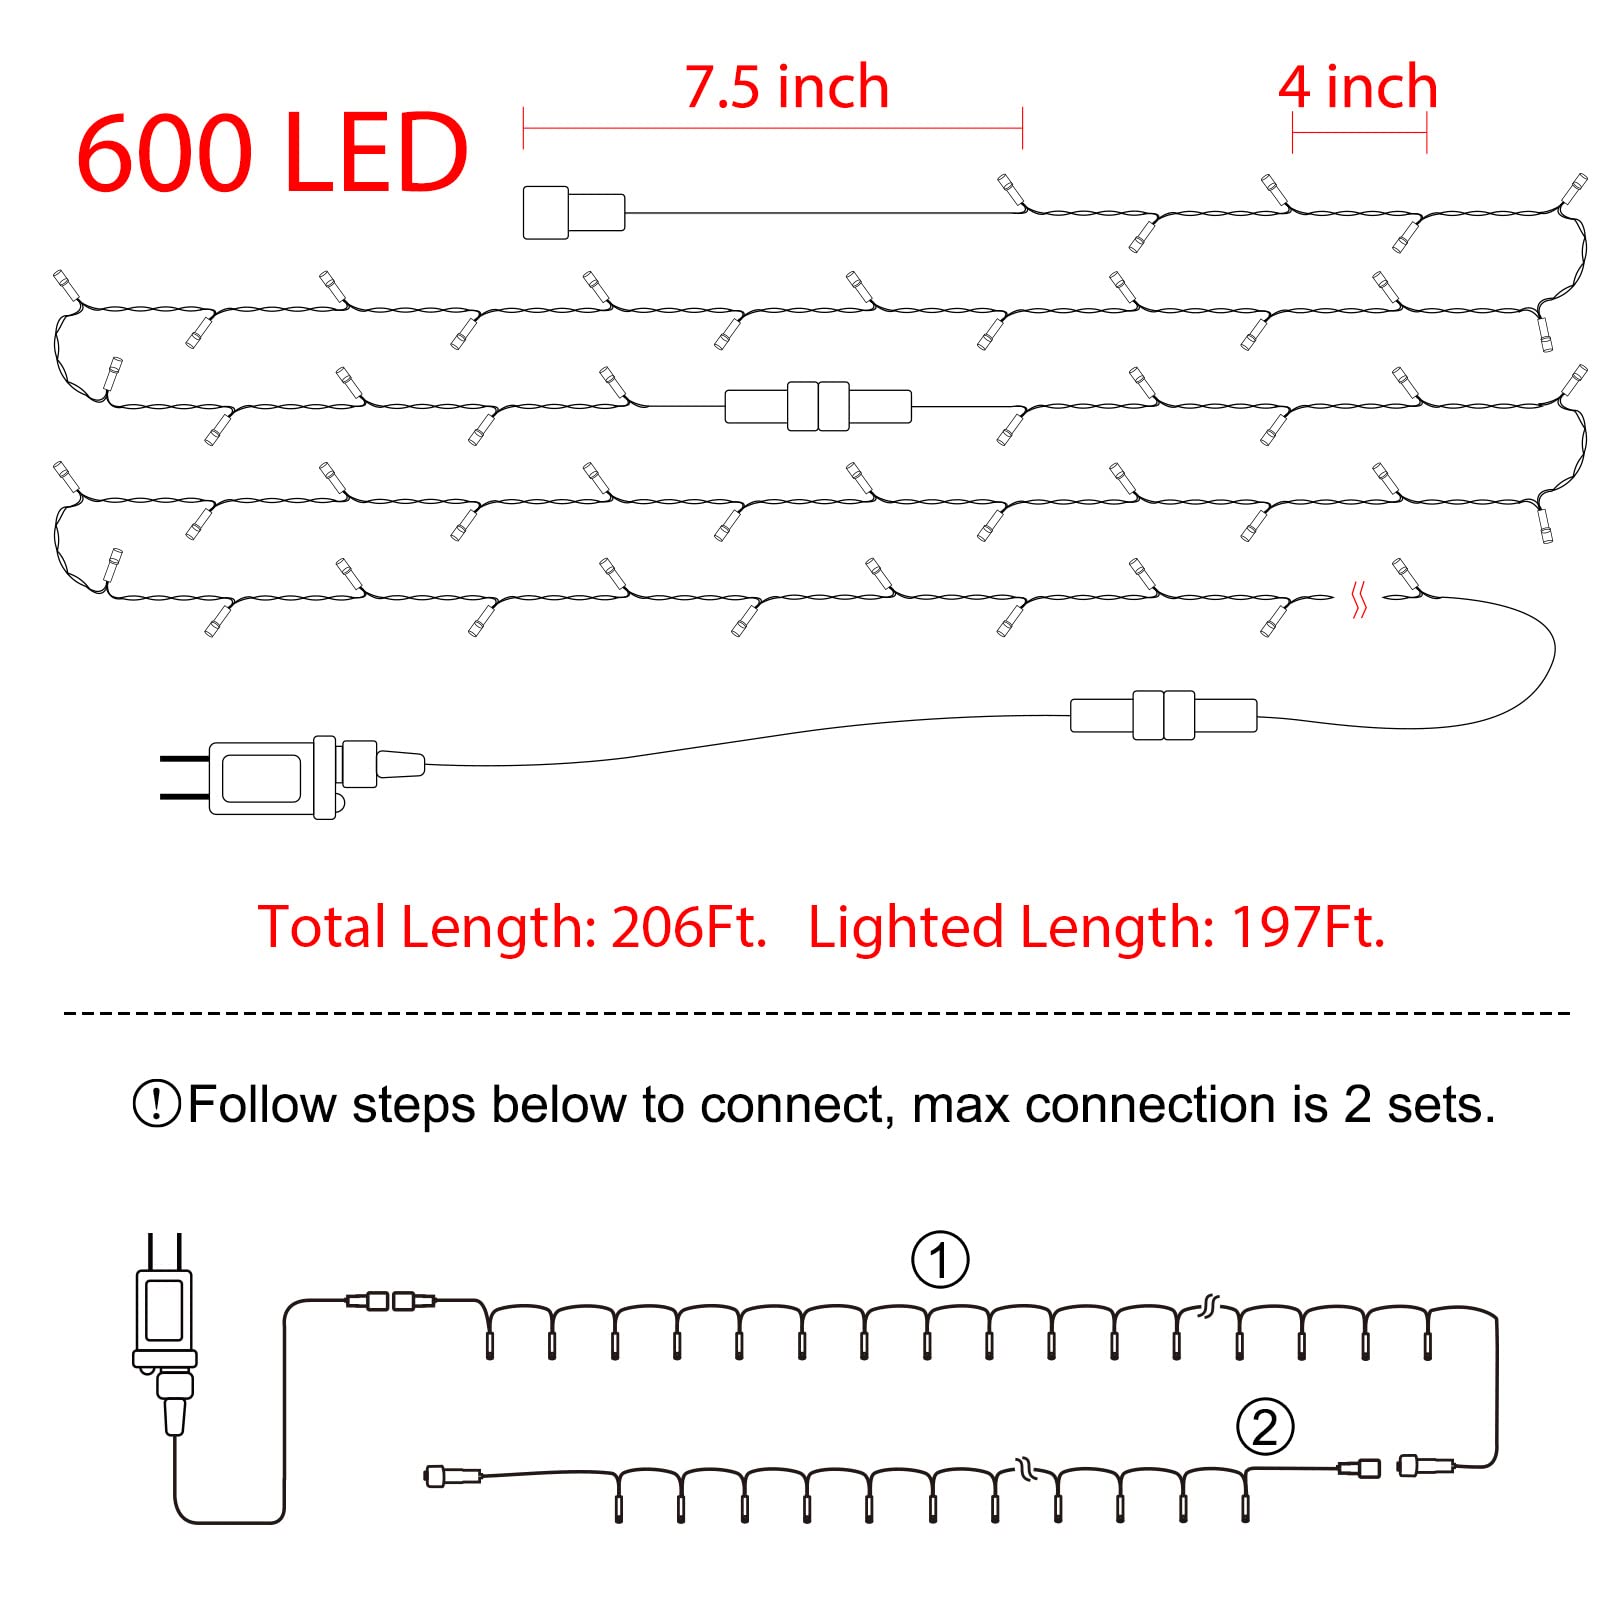 168 Feet / 600 LED / Warm White and Multicolor/ Green Wire